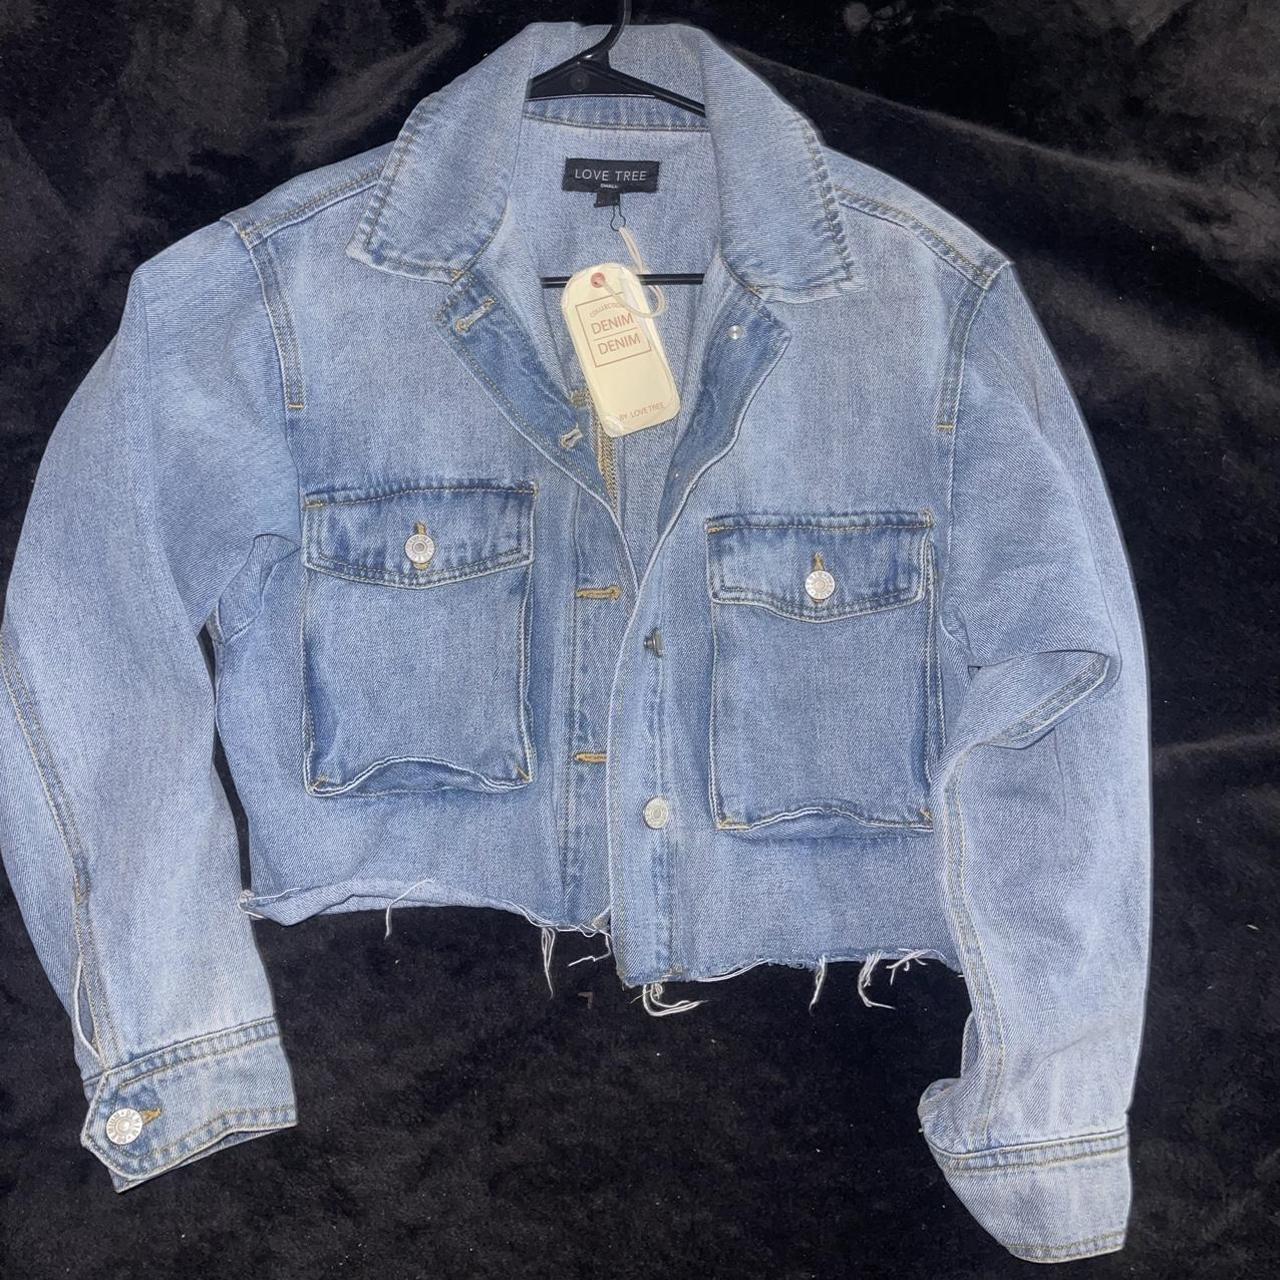 Light Wash Denim Jacket - Small Bought from... - Depop